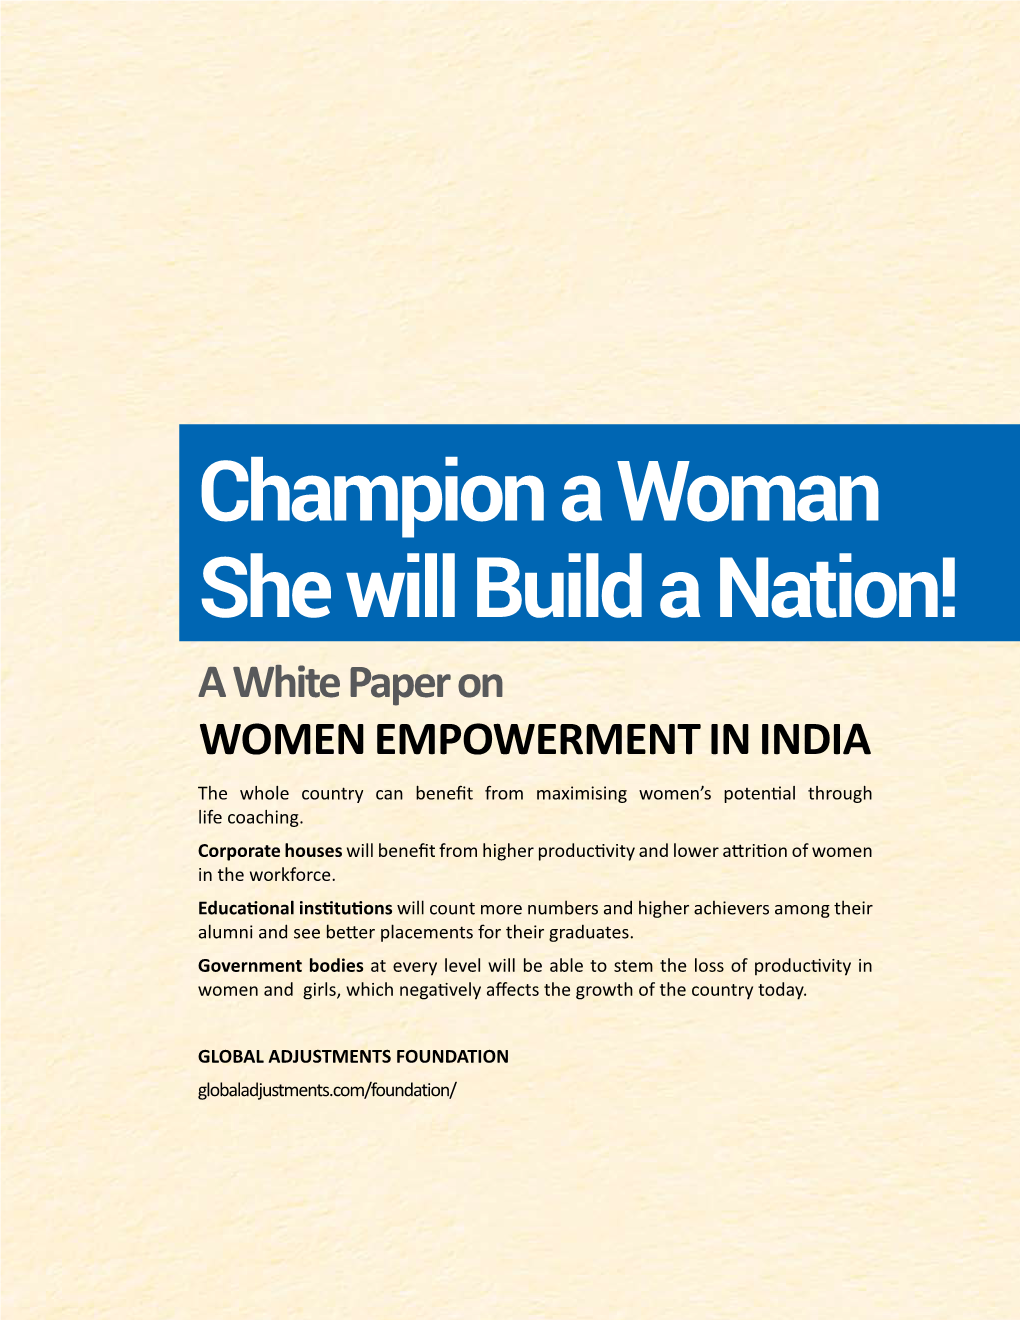 She Will Build a Nation! Champion a Woman